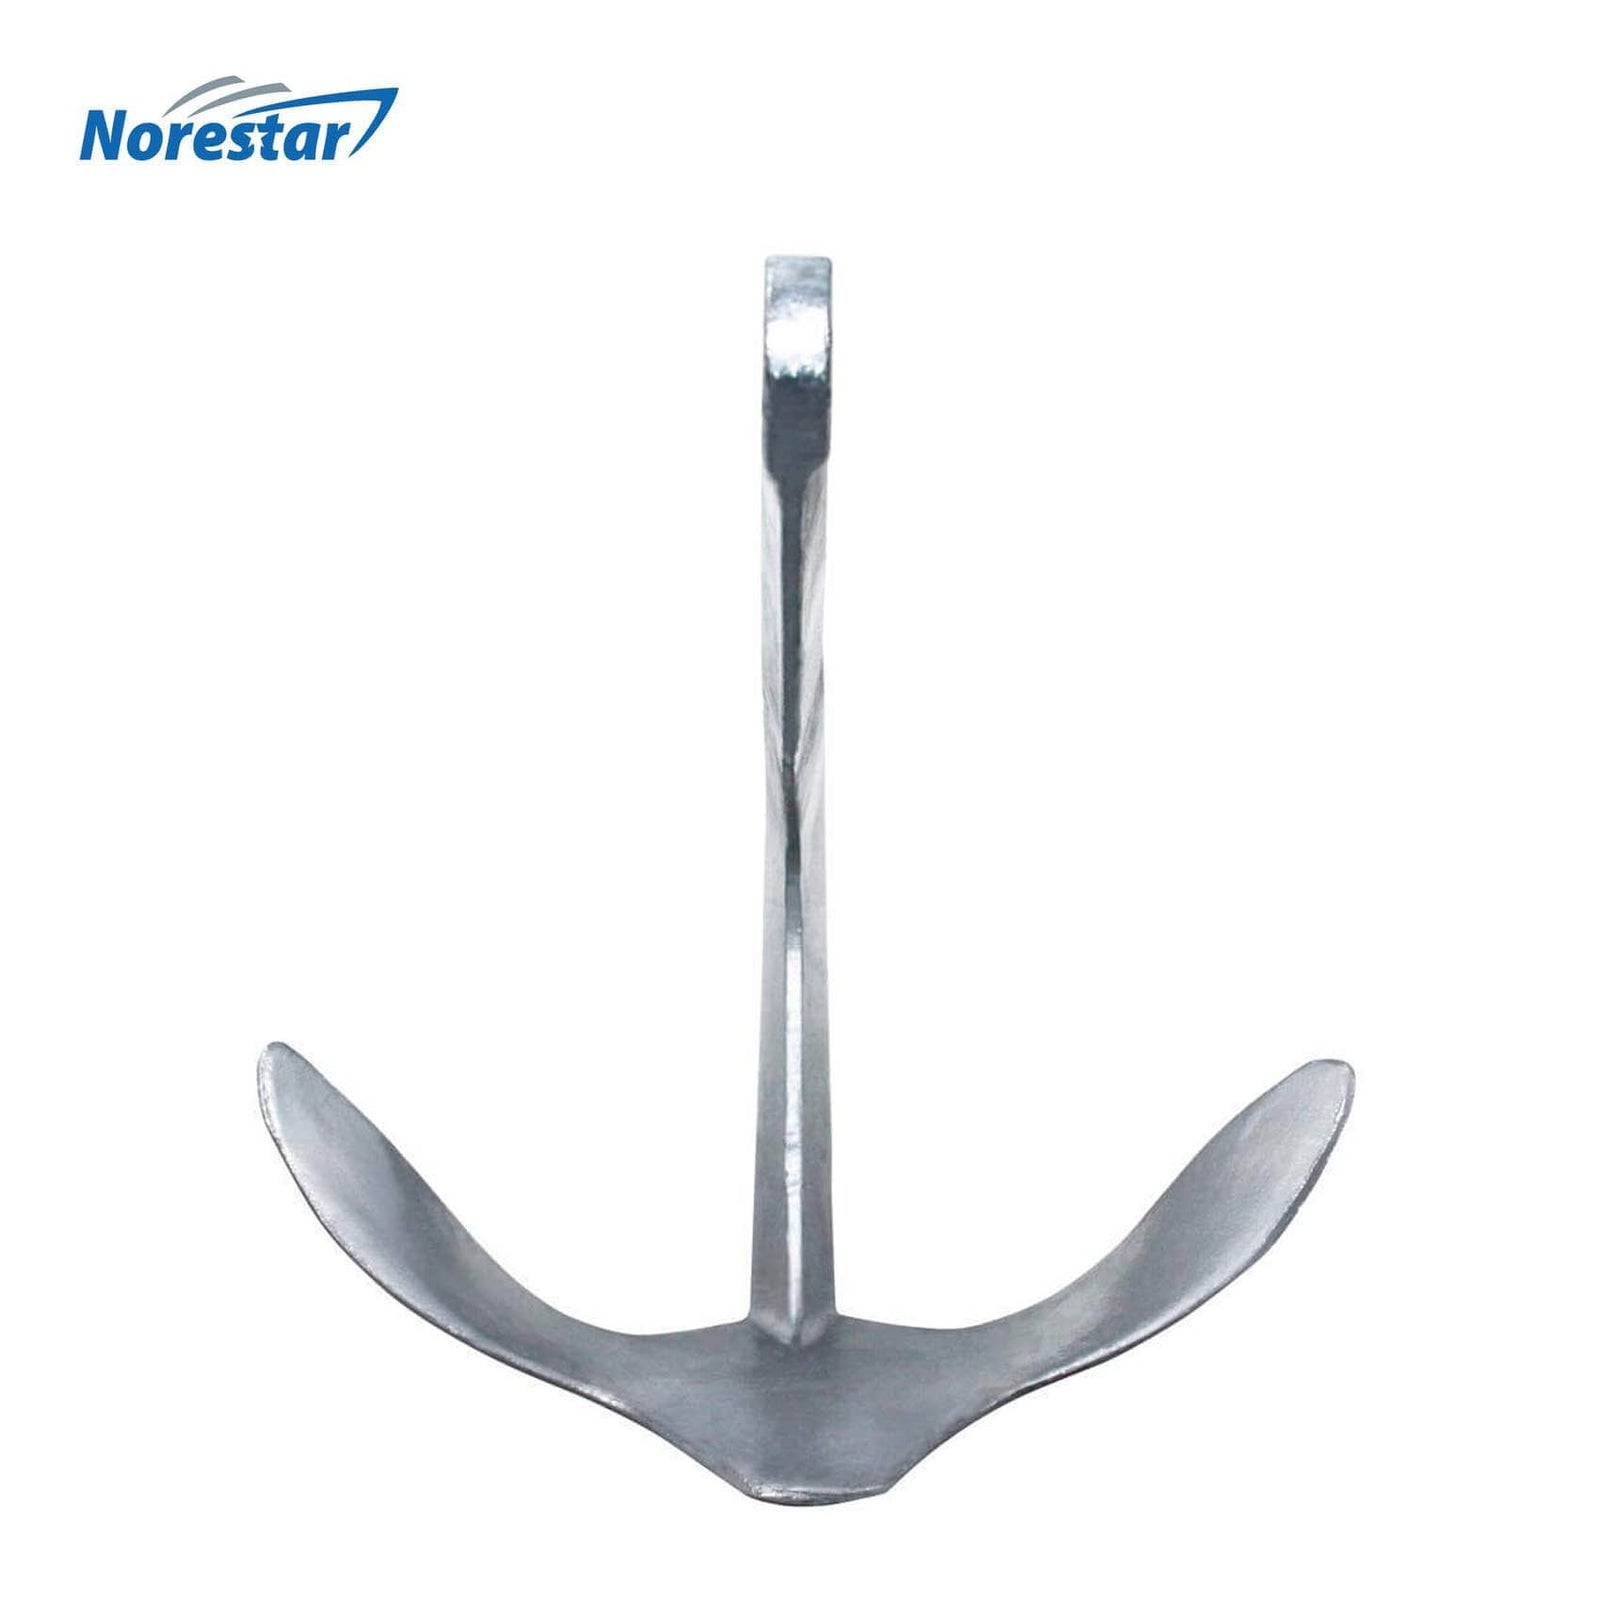 Galvanized Steel Bruce/Claw Boat Anchor by Norestar - Front